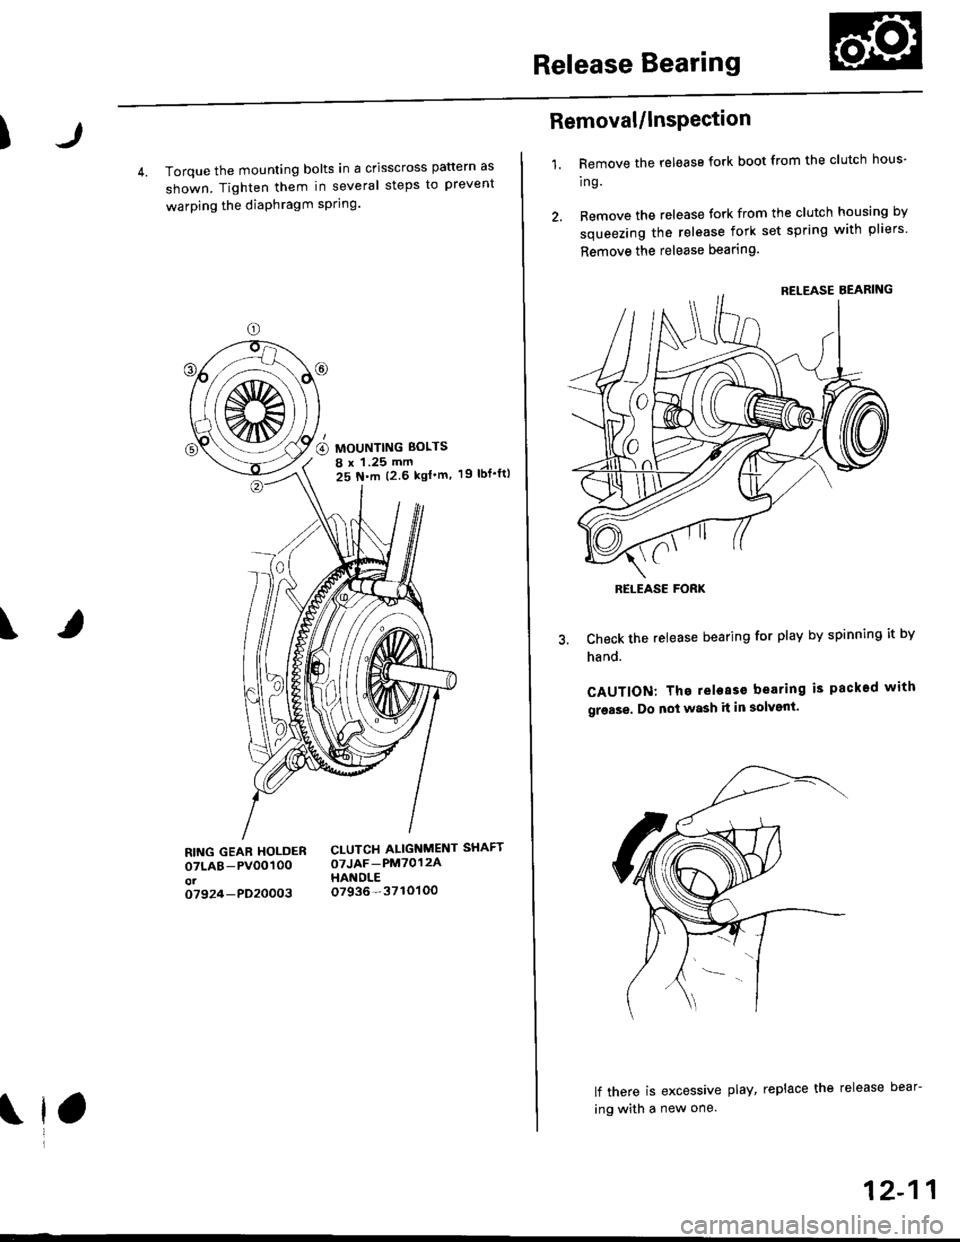 HONDA CIVIC 2000 6.G Workshop Manual Release Bearing
)
4. Torque the mounting bolts in a crisscross pattern as
shown. Tighten them in several steps to prevent
warping the diaPhragm sPring.
19 rbf.ft)
\
RING GEAR HOLDERoTLAB-PV00100ot0792